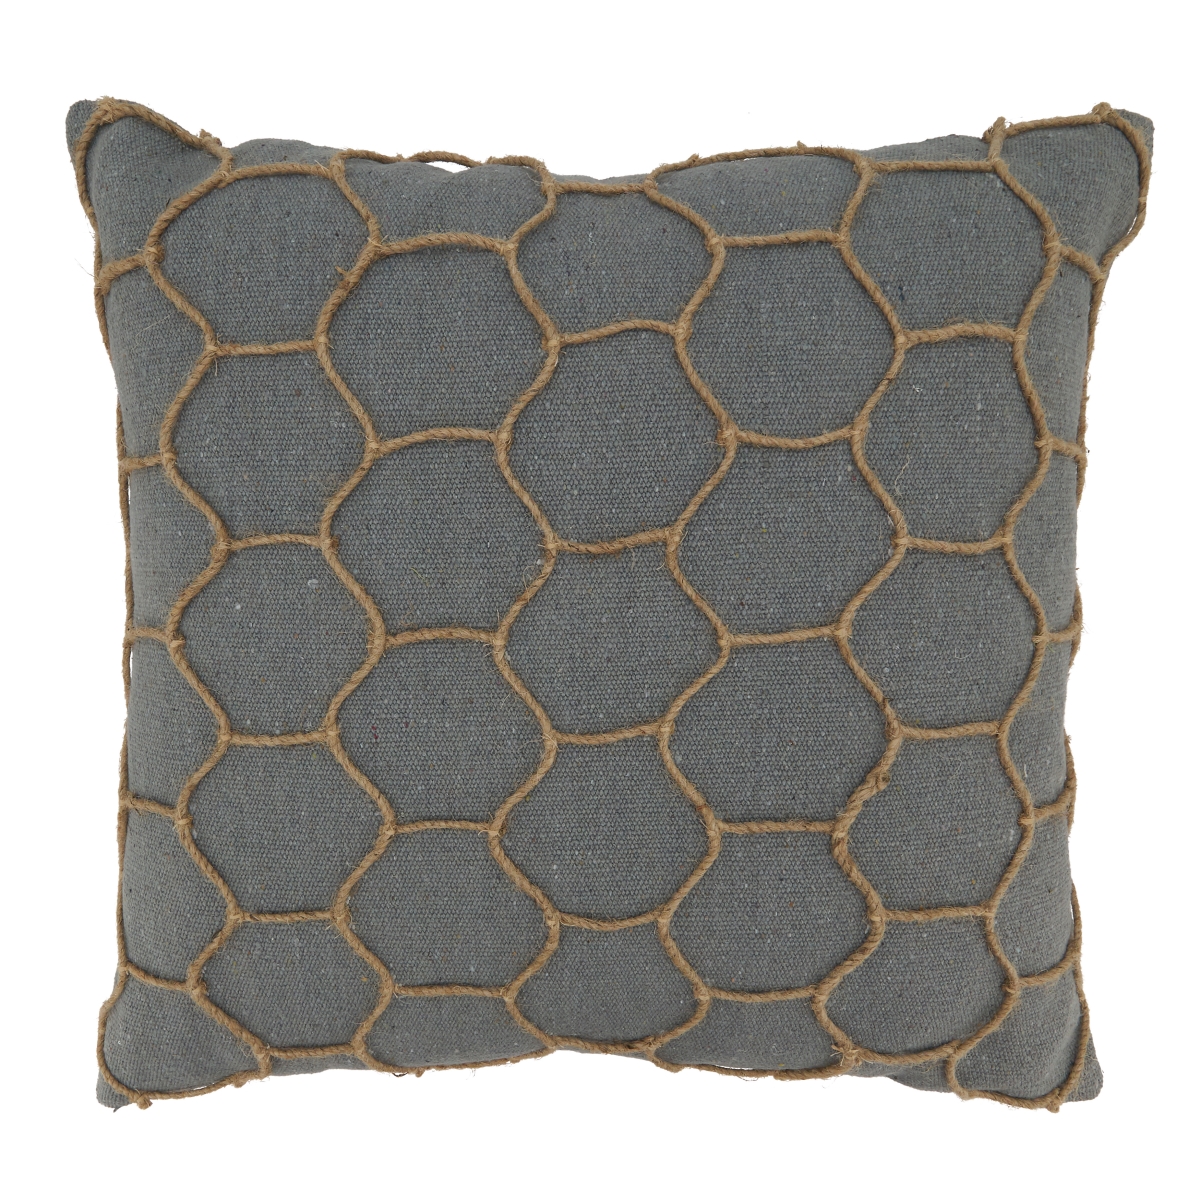 SARO LIFESTYLE 550.GY18SC 18 in. Dori Embroidered Square Pillow Cover, Grey